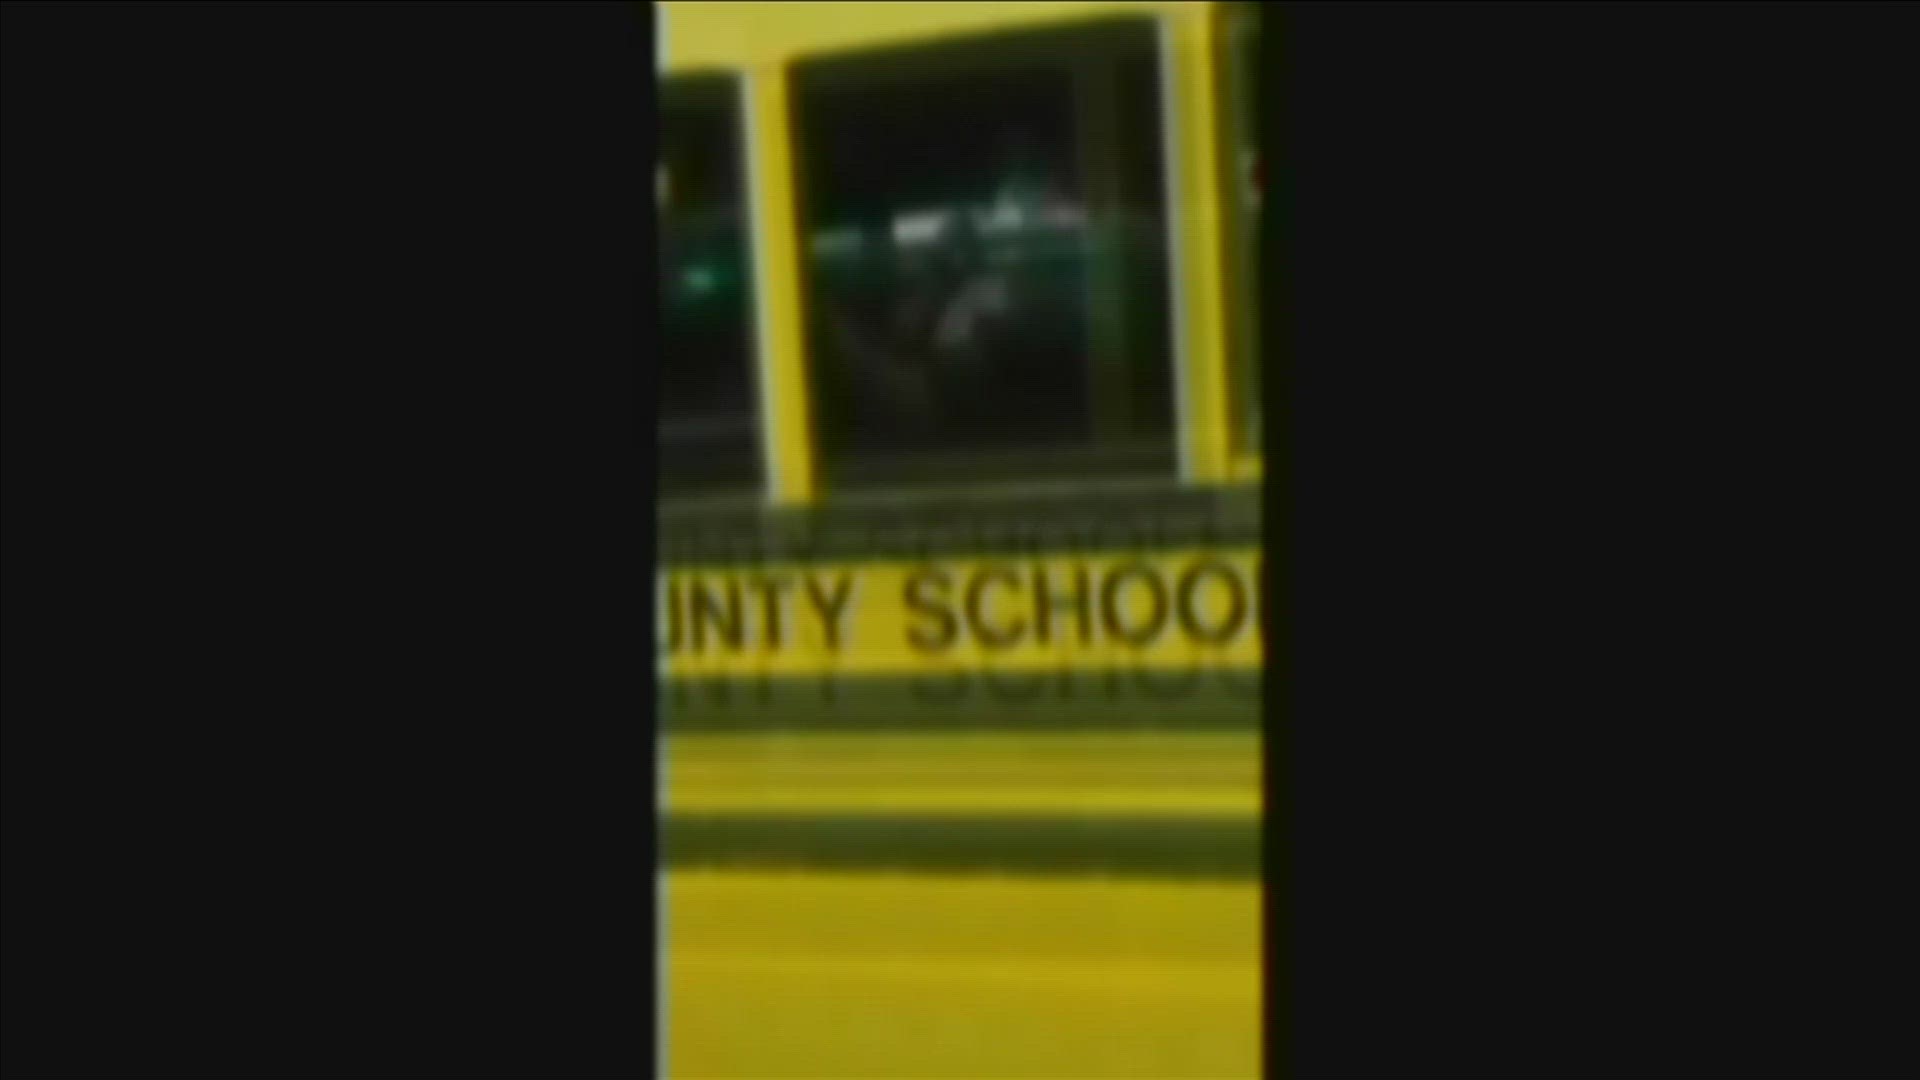 In a video by Misty Grubbs, children can be seen inside of the bus crying and screaming for help while adults stand outside telling the driver to let them exit.